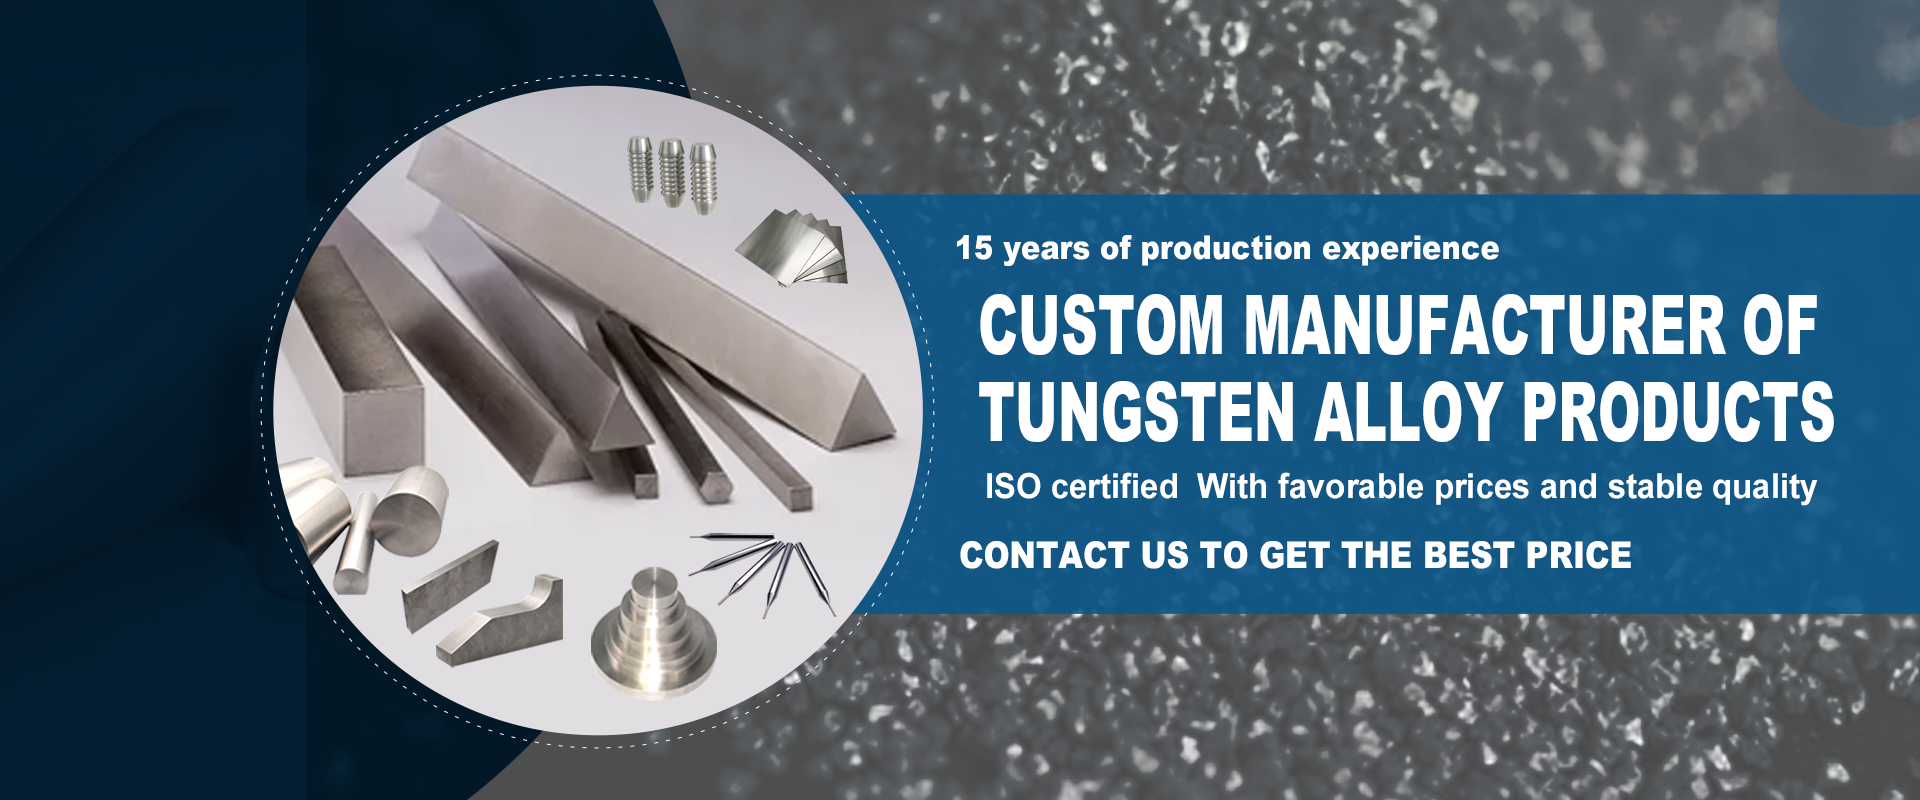 custom manufacture of tungsten alloy products